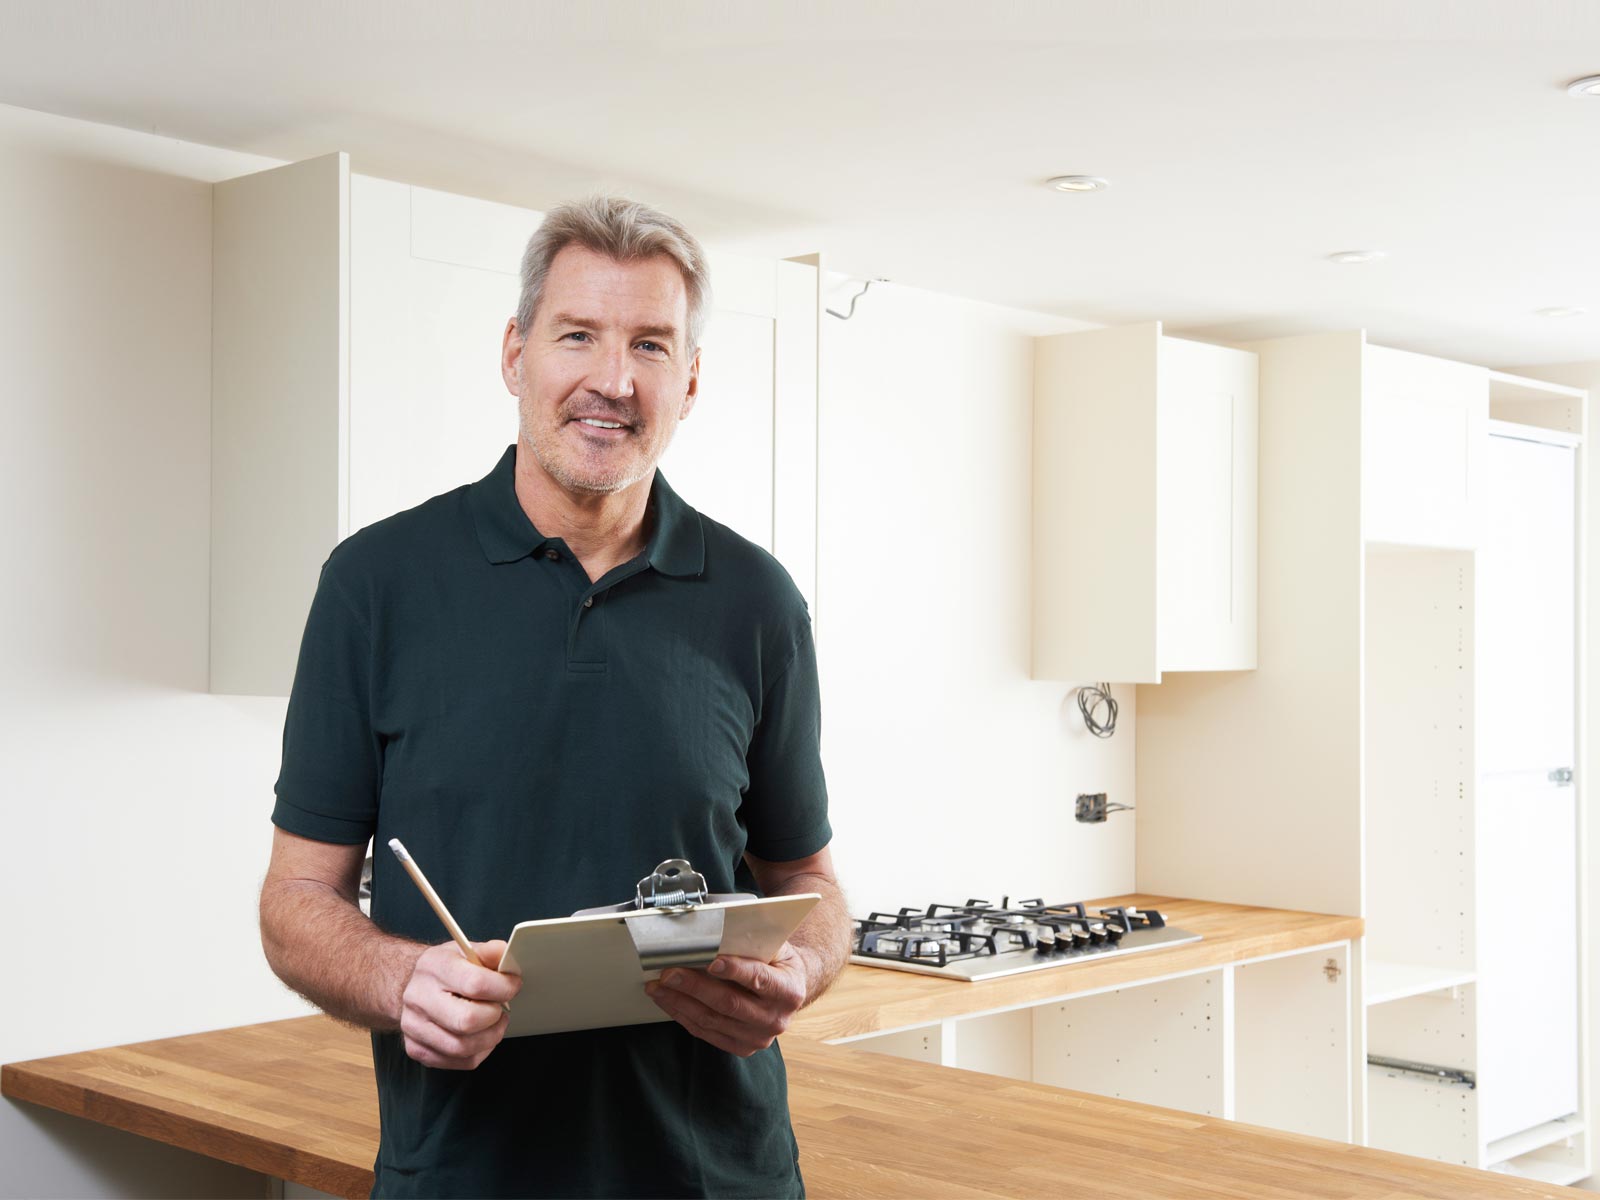 A private kitchen fitter inspecting the quality of a fitted kitchen